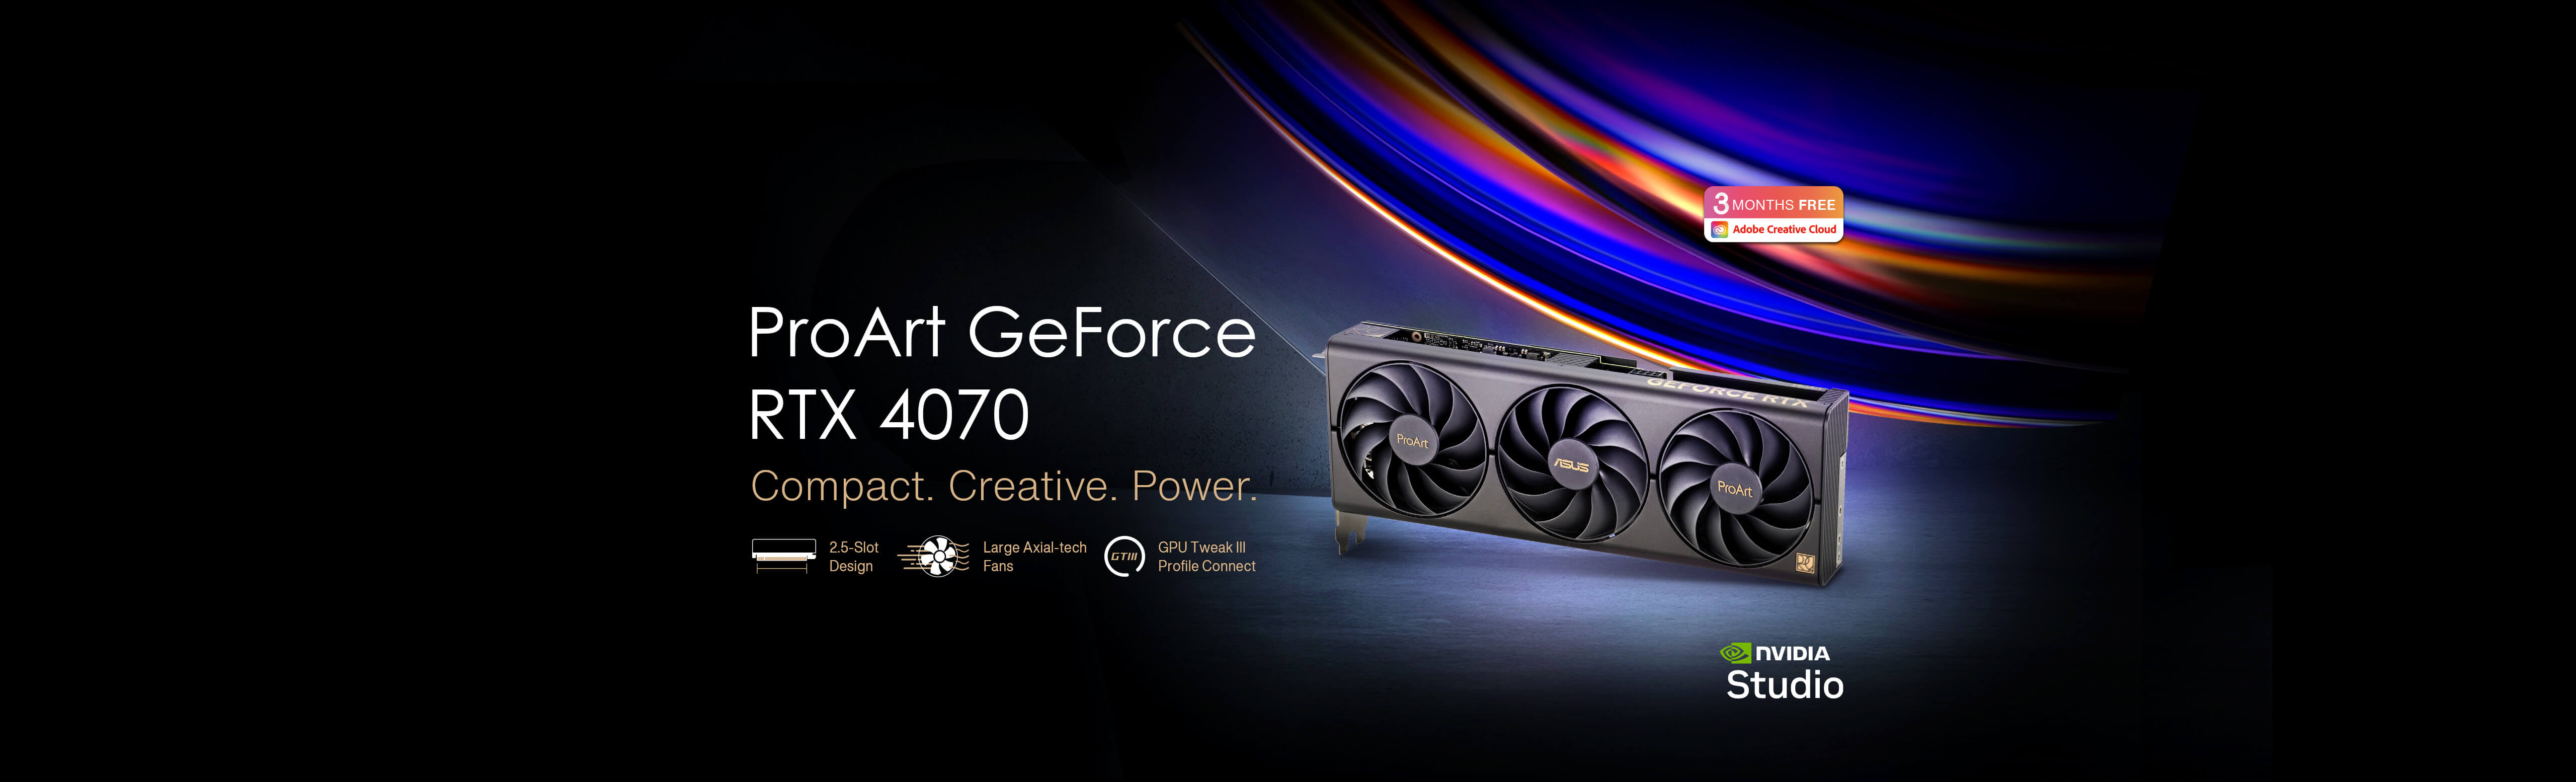 ASUS ProArt GeForce RTX™ 4070 graphics card standing on a raw concreate floor with Adobe Creative Cloud and NVIDIA Studio's logos